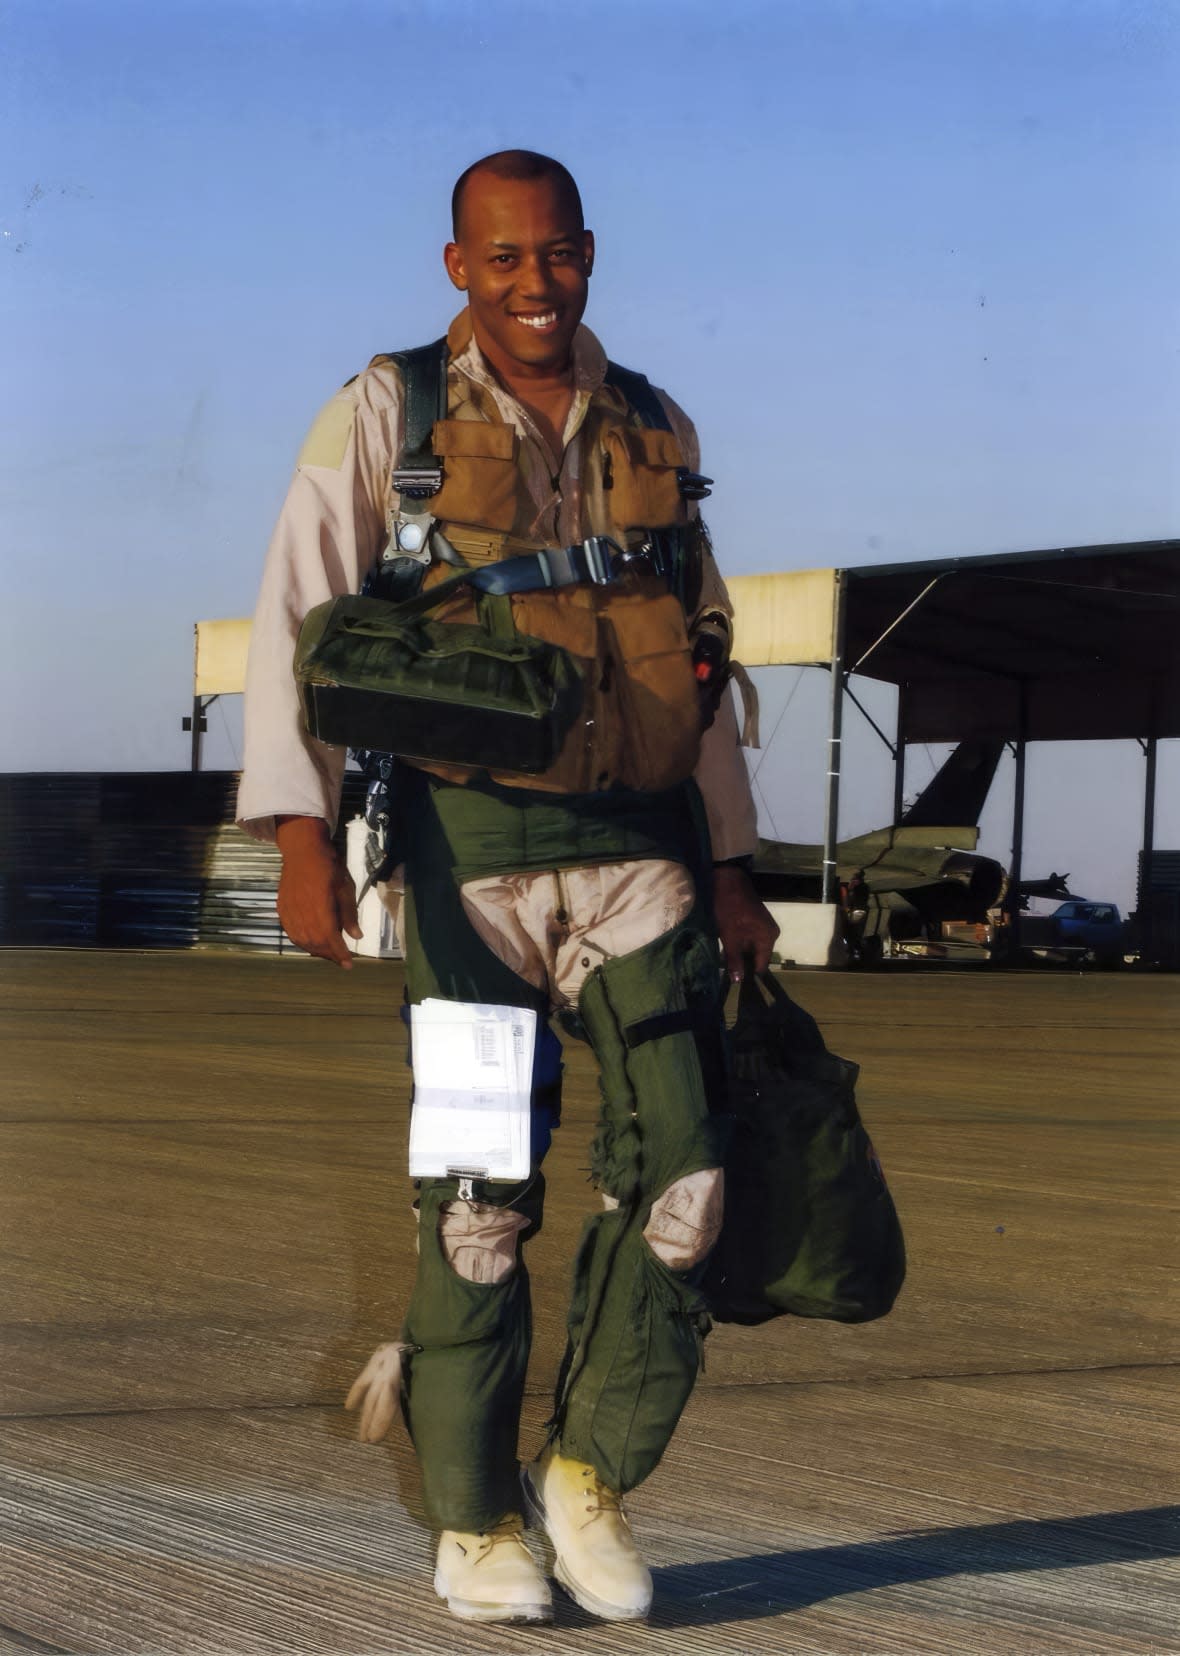 In this image provided by the U.S. Air Force, Lt. Col. CQ Brown, Jr. deployed as an F-16 squadron commander in support of Operation Southern Watch in 2001, walks on the flight line. Brown also deployed or directly supported Operation Northern Watch, Operation Enduring Freedom, Operation Odyssey Dawn and Operation Unified Protector, and Operation Inherent Resolve. President Joe Biden is expected to announce Air Force Gen. CQ Brown Jr., a history-making fighter pilot with recent experience countering China in the Pacific, to serve as the next chairman of the Joint Chiefs of Staff. (U.S. Air Force via AP)